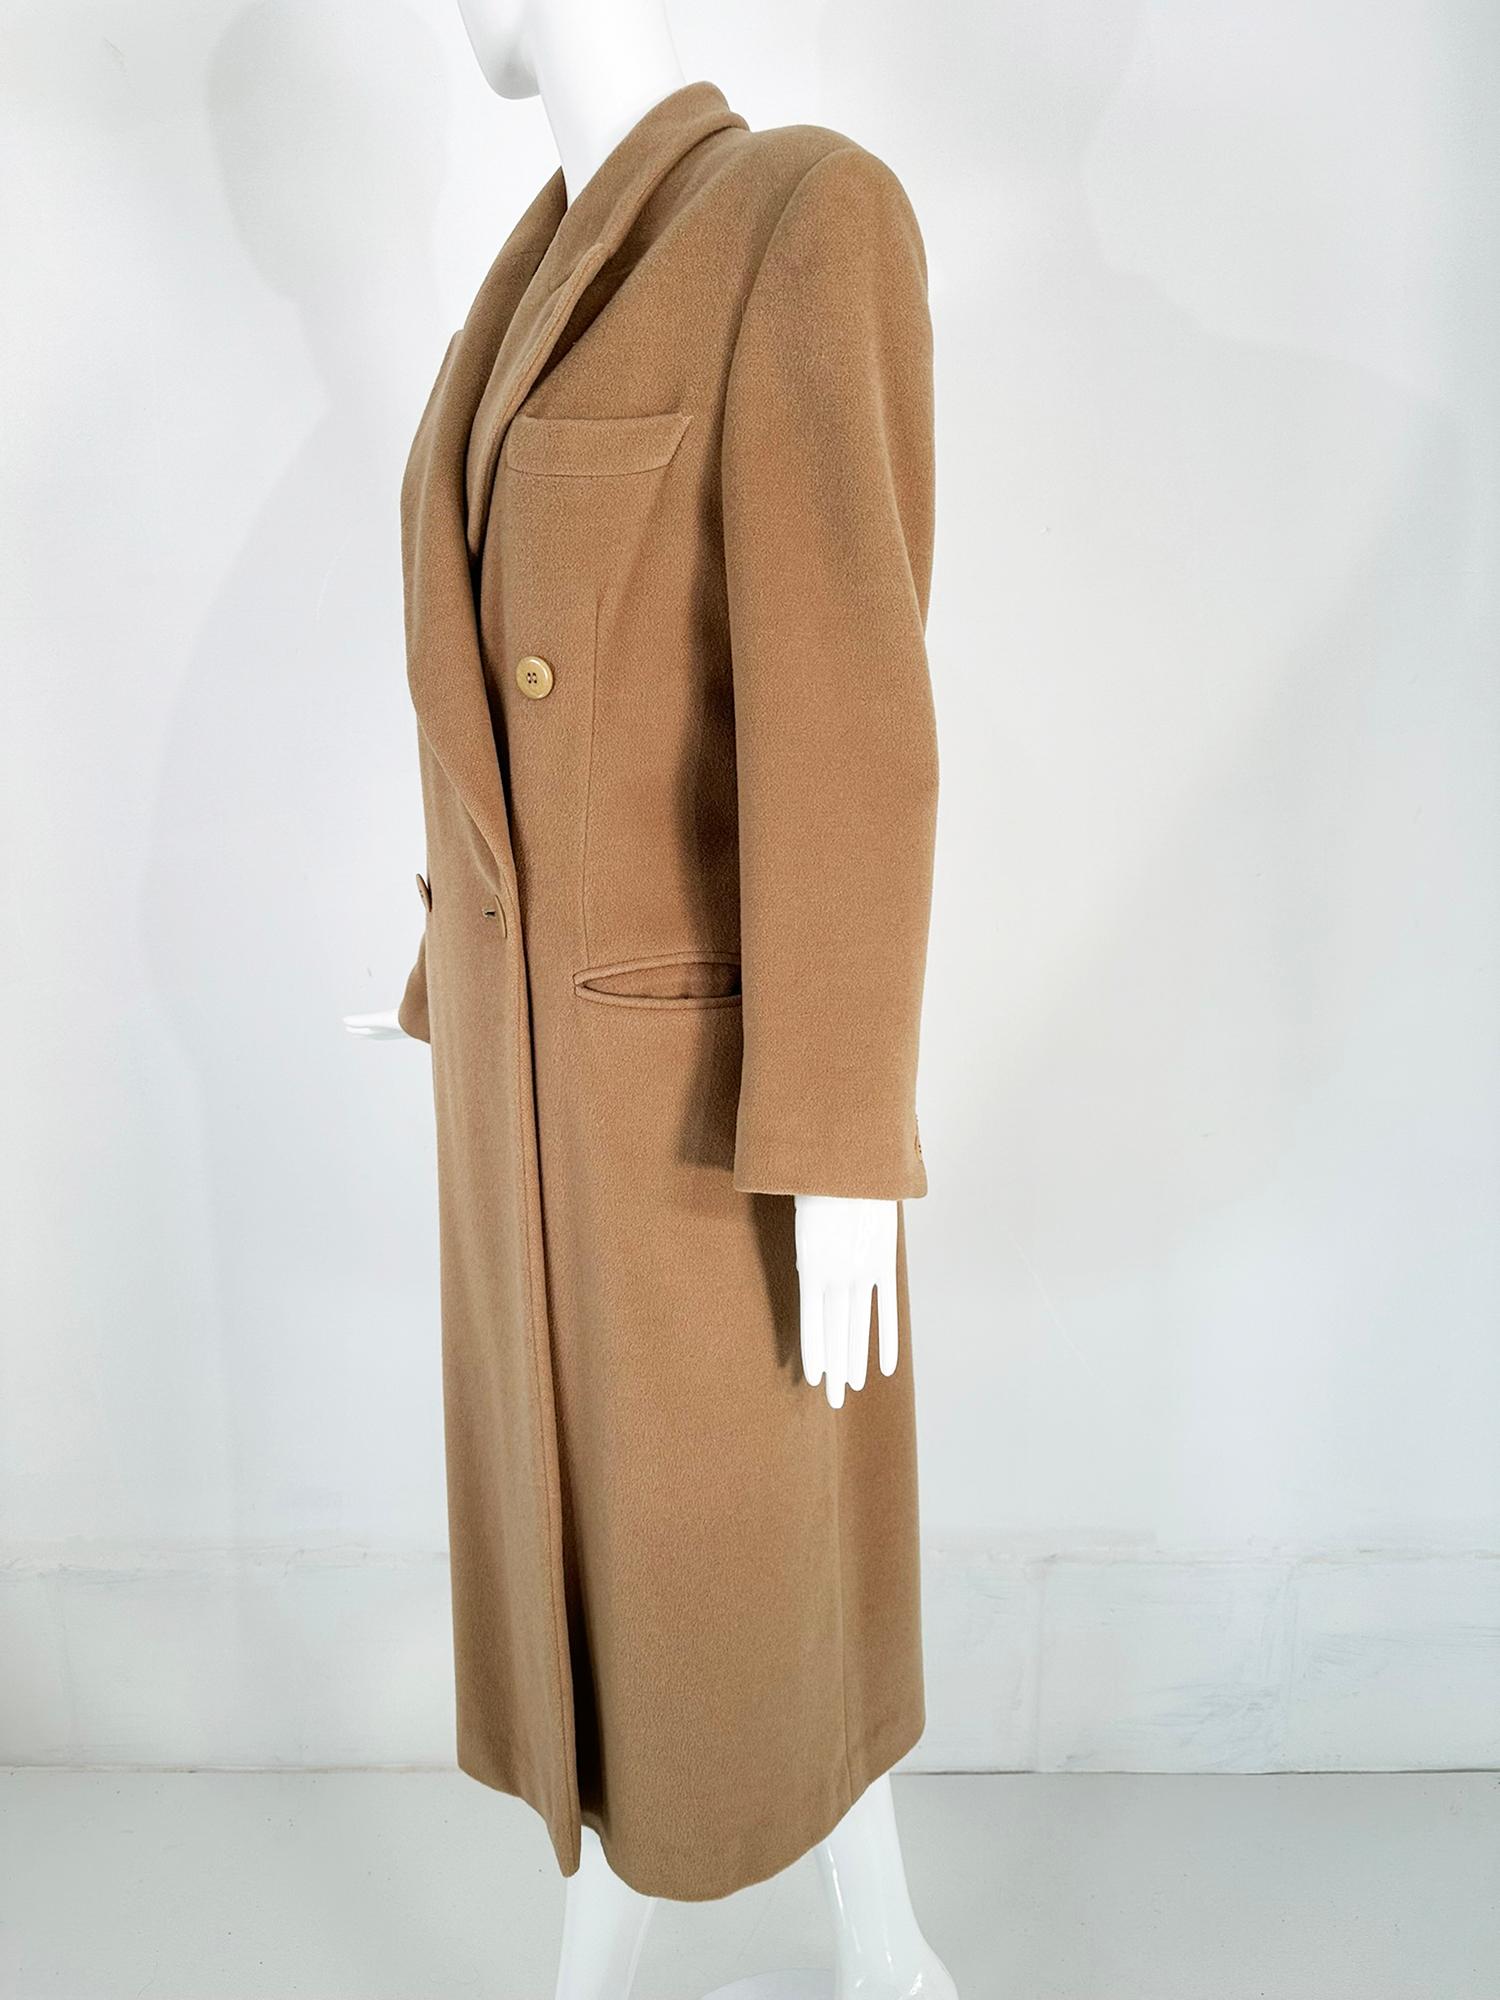 Women's Giorgio Armani Camel Hair Classic Double Breasted Coat 1990s For Sale